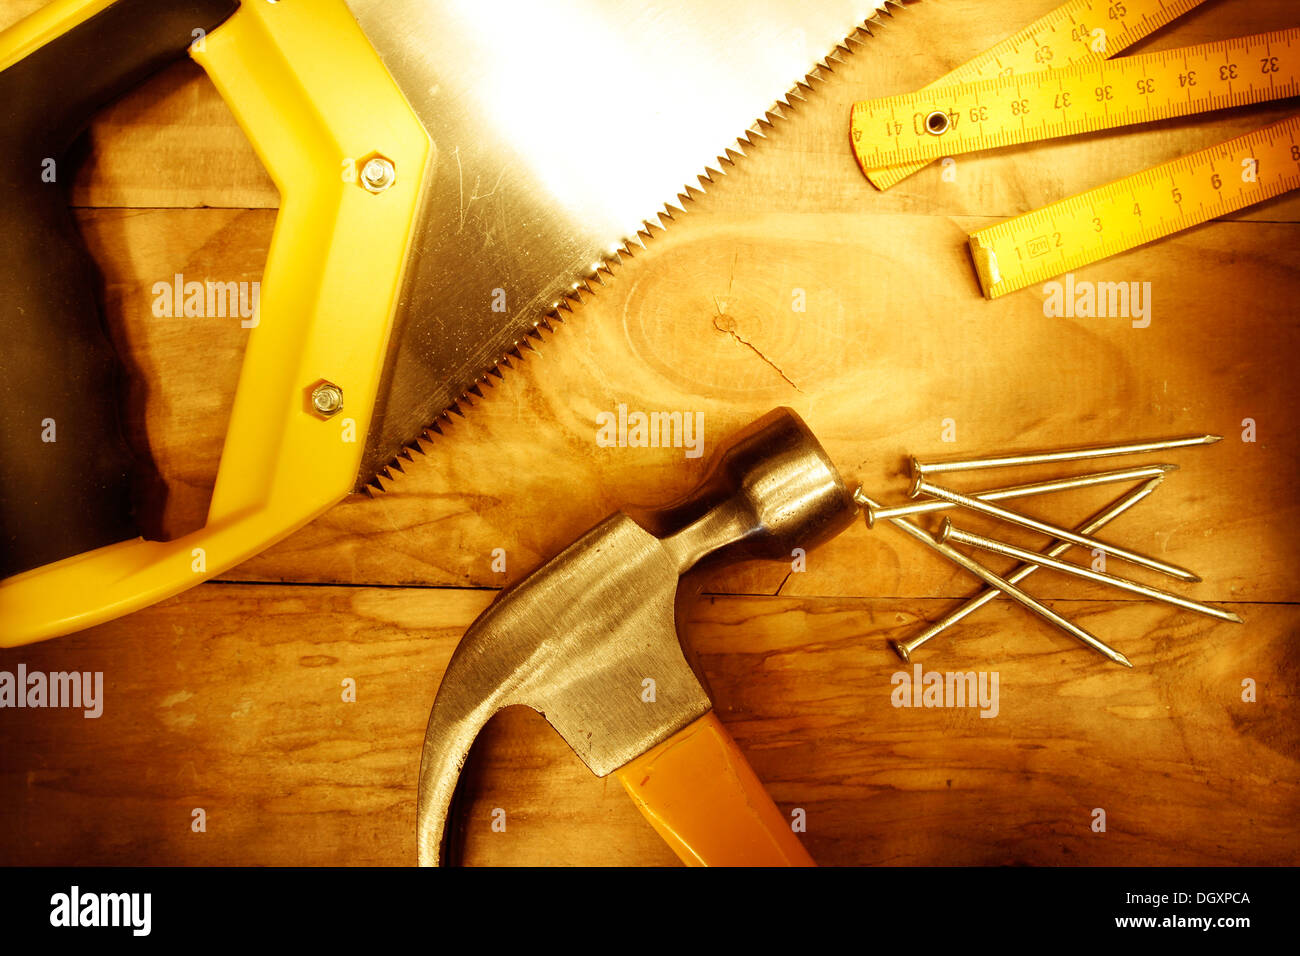 Hammer, nails, ruler and saw on wood Stock Photo